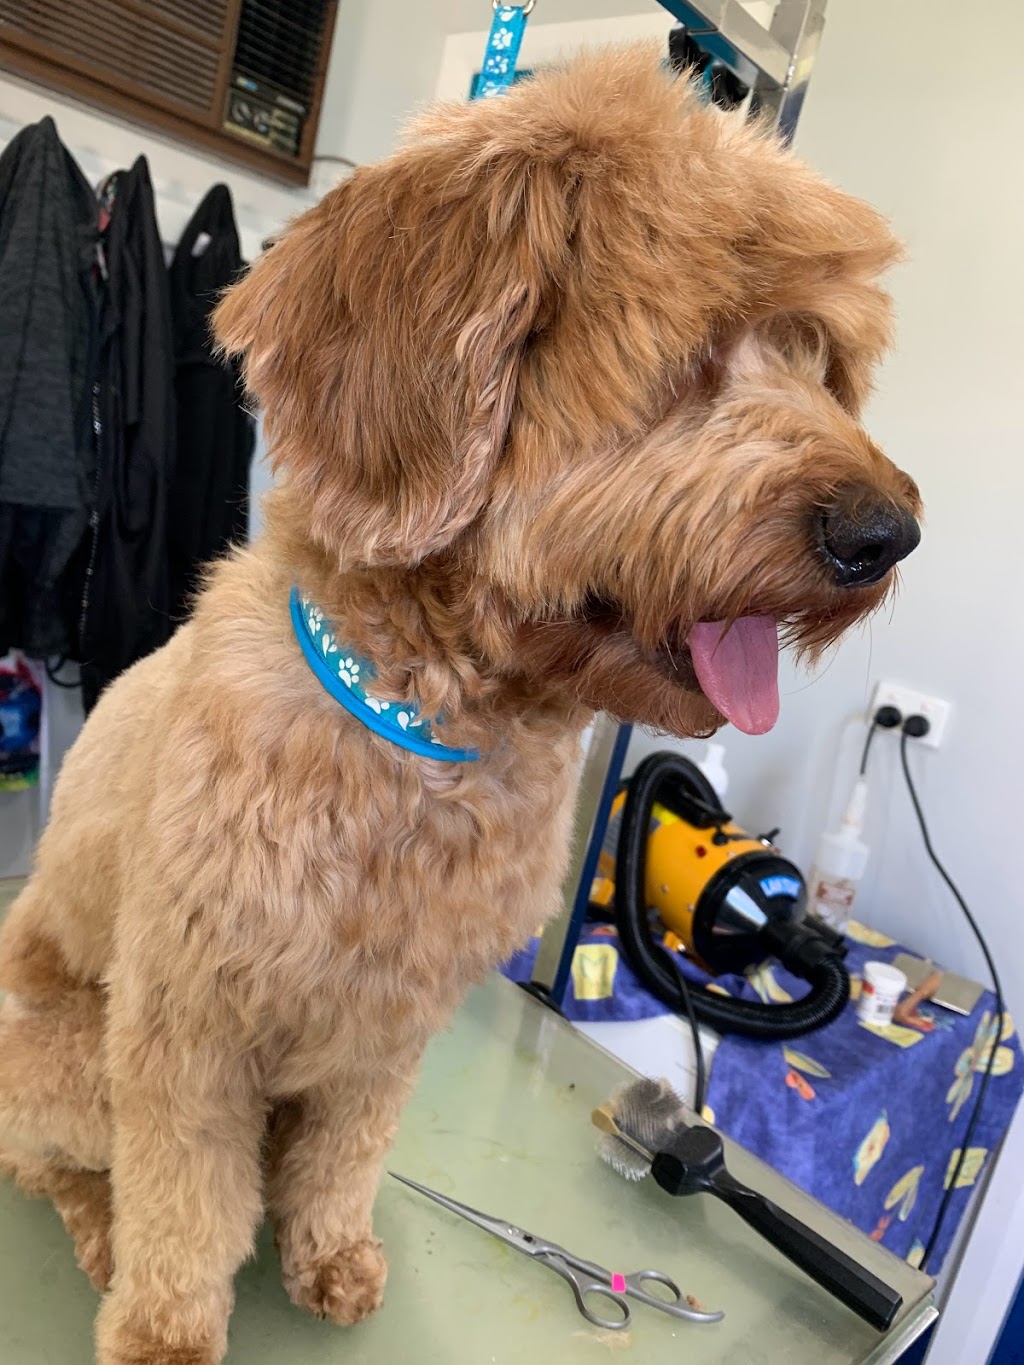 Little Brown Dogs SWR Dog Grooming | 19 Dilberang Cl, South West Rocks NSW 2431, Australia | Phone: 0439 988 918